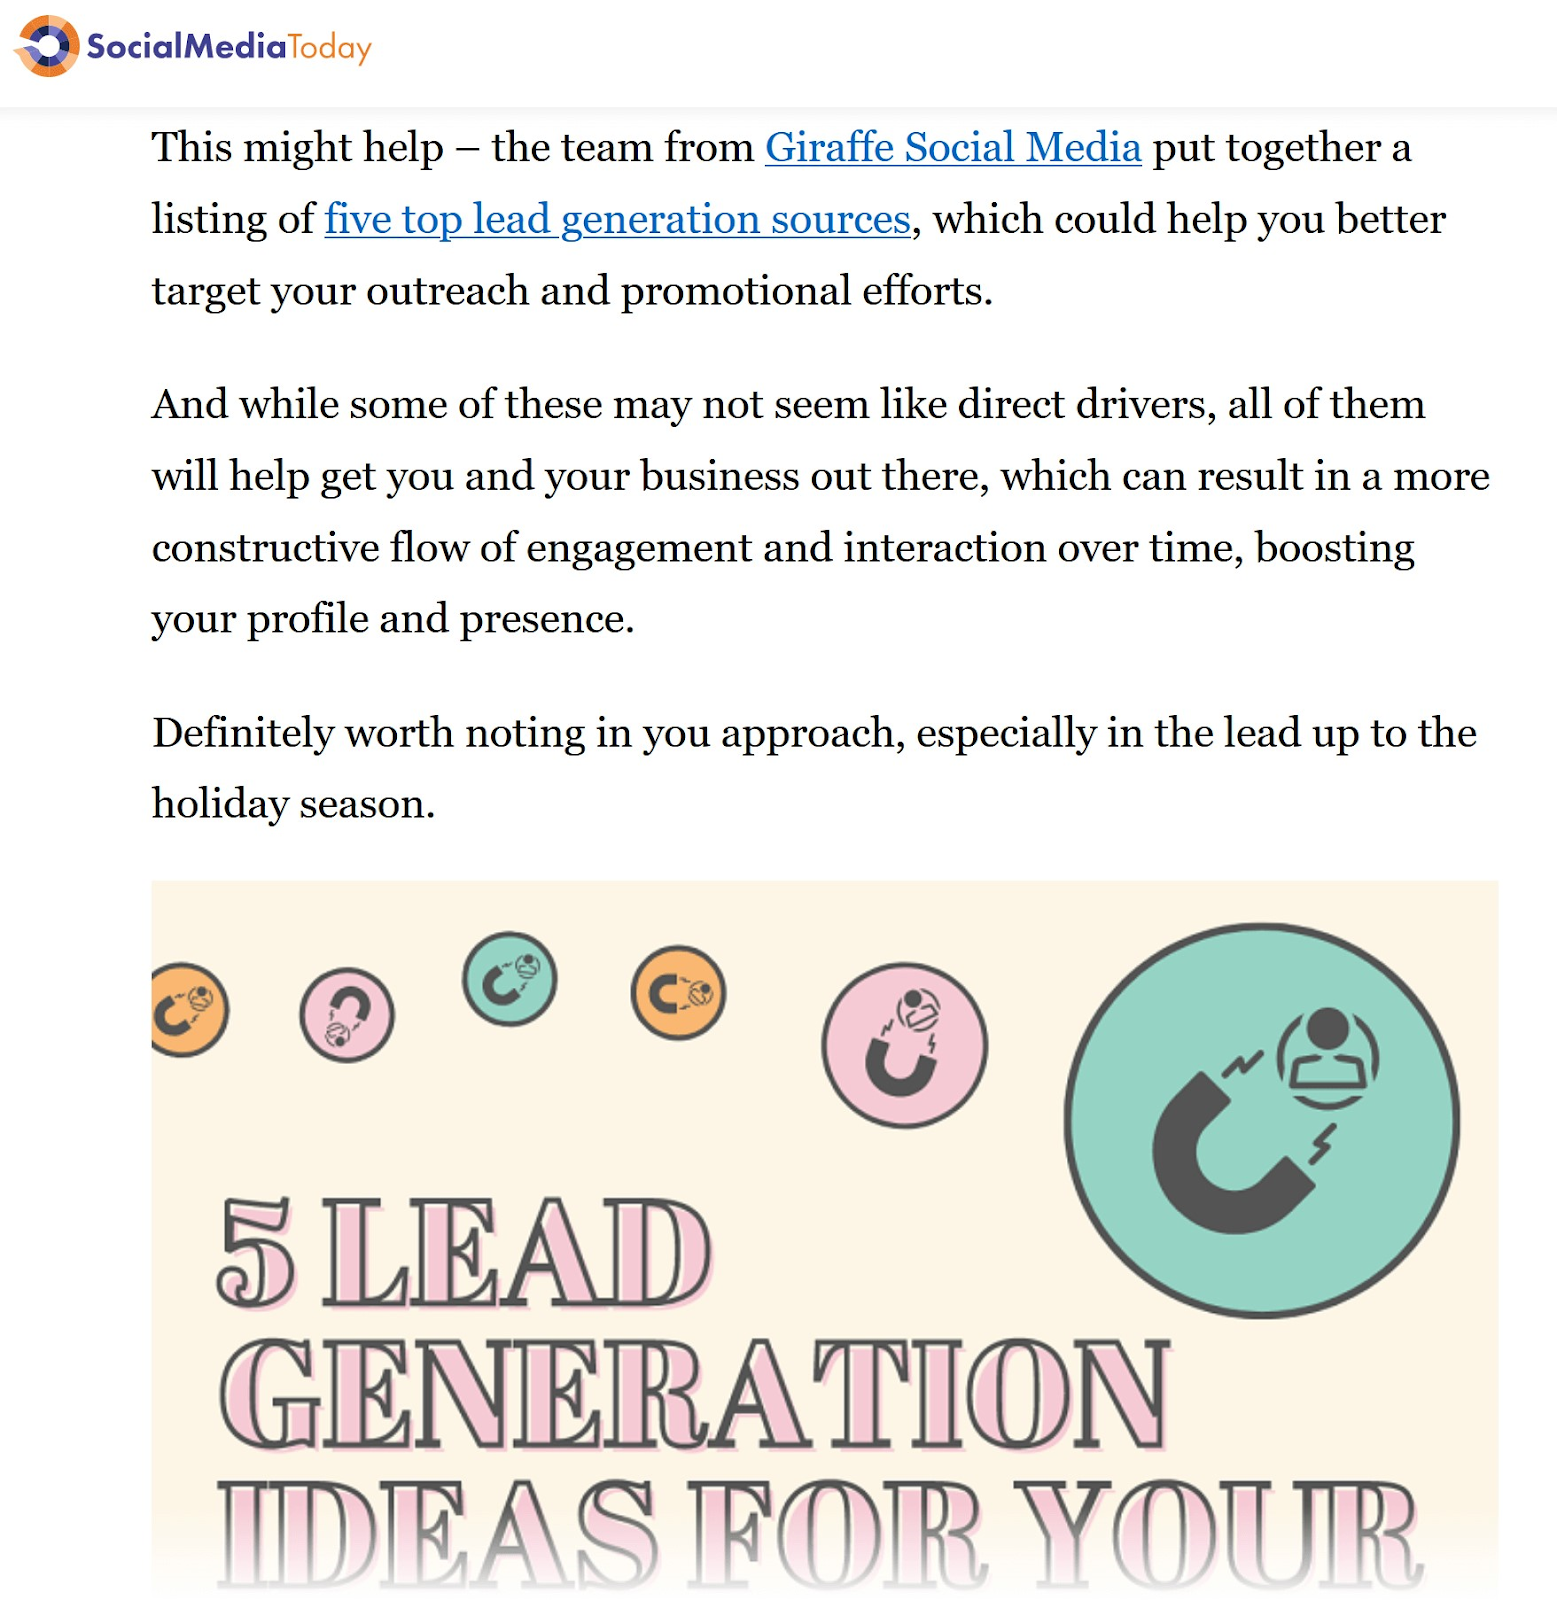 Social Media Today’s post about Giraffe’s infographic “five lead generation ideas”